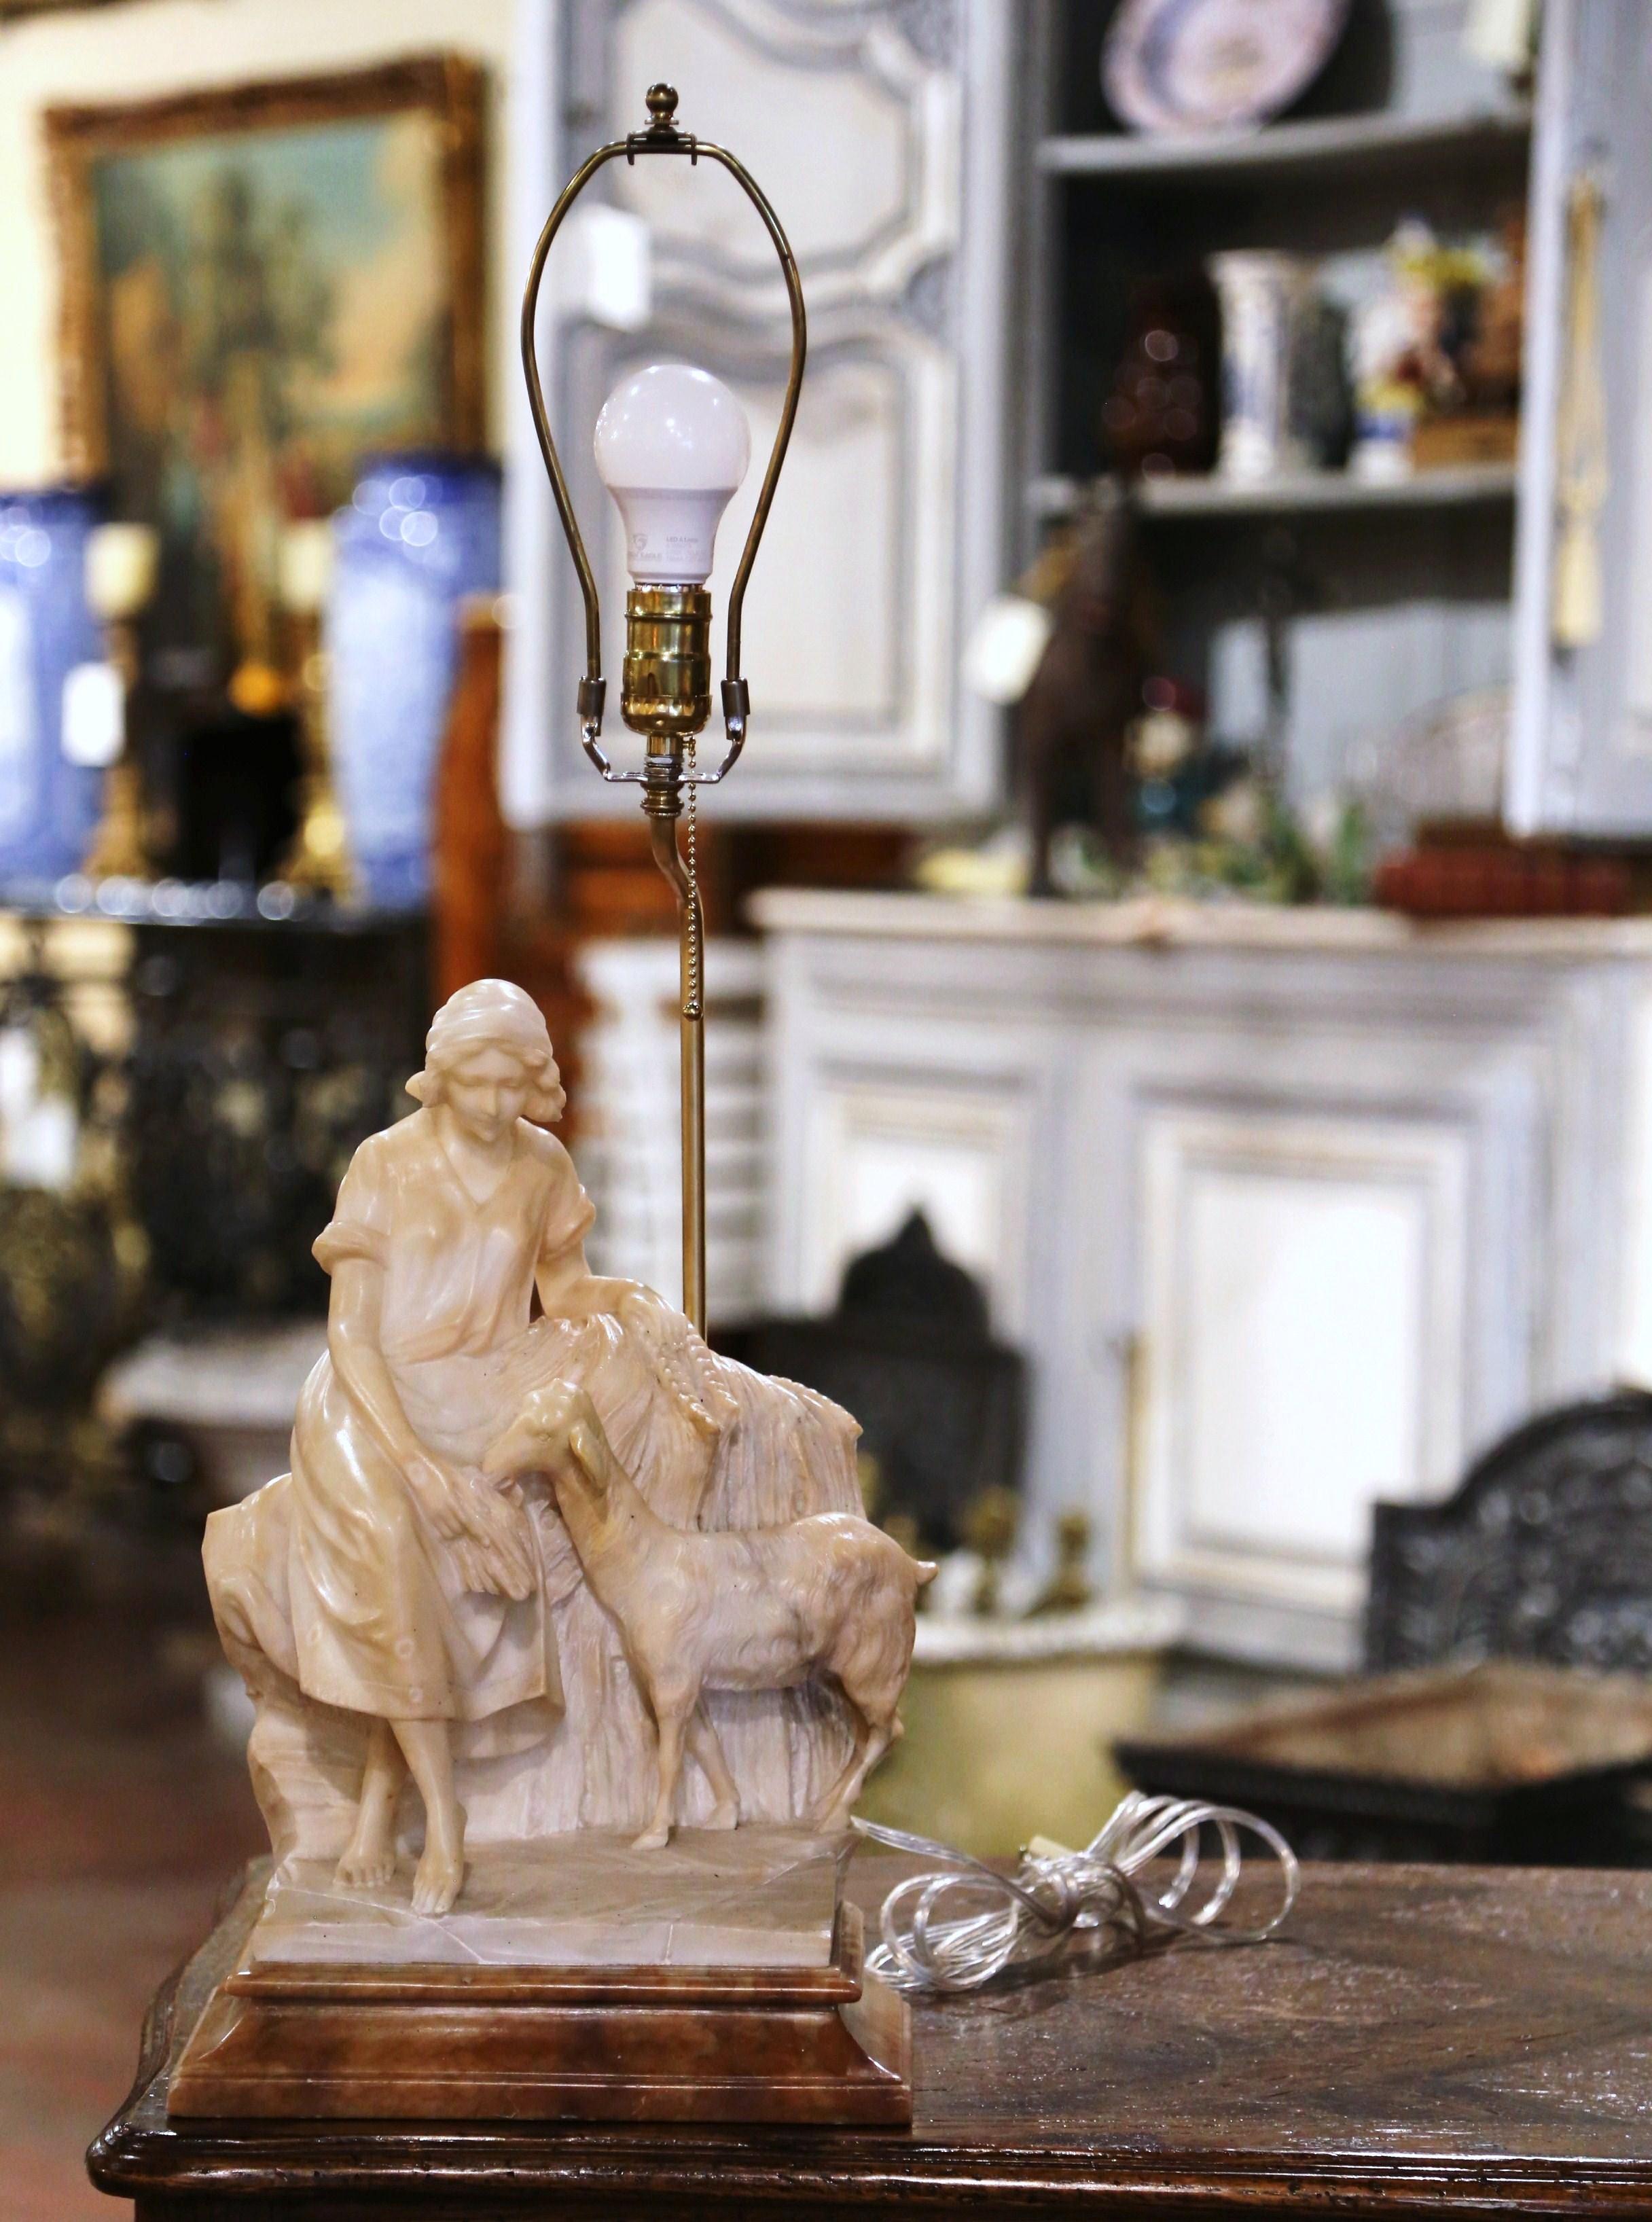 This charming antique alabaster sculpture lamp was created in Italy circa 1890. Signed on the back by R. Colivicchi, the composition depicts a beautiful scene with a young woman feeding a goat. With intricate details throughout, the carved 